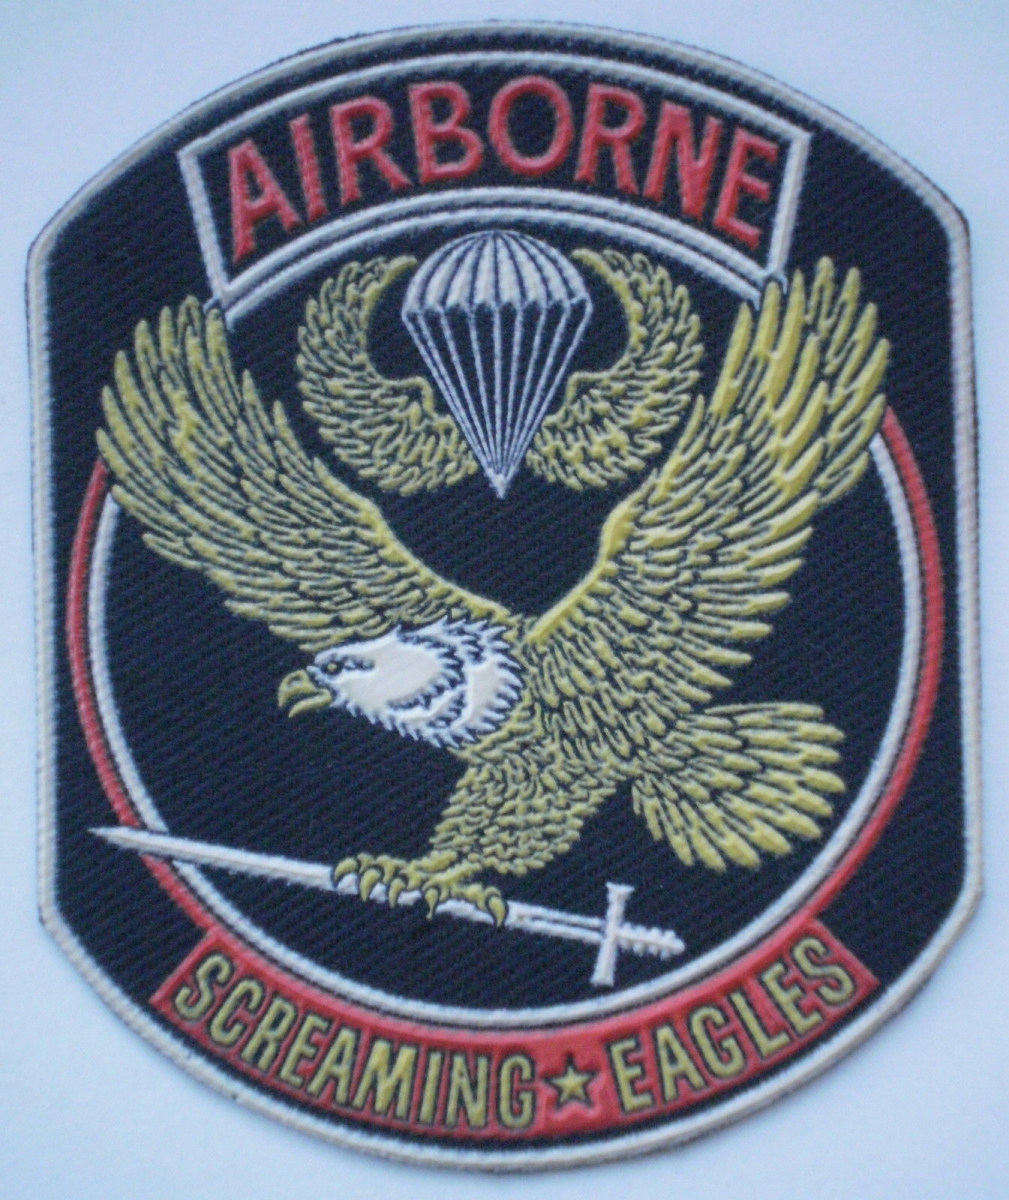 242nd Airborne training center ( unofficial)